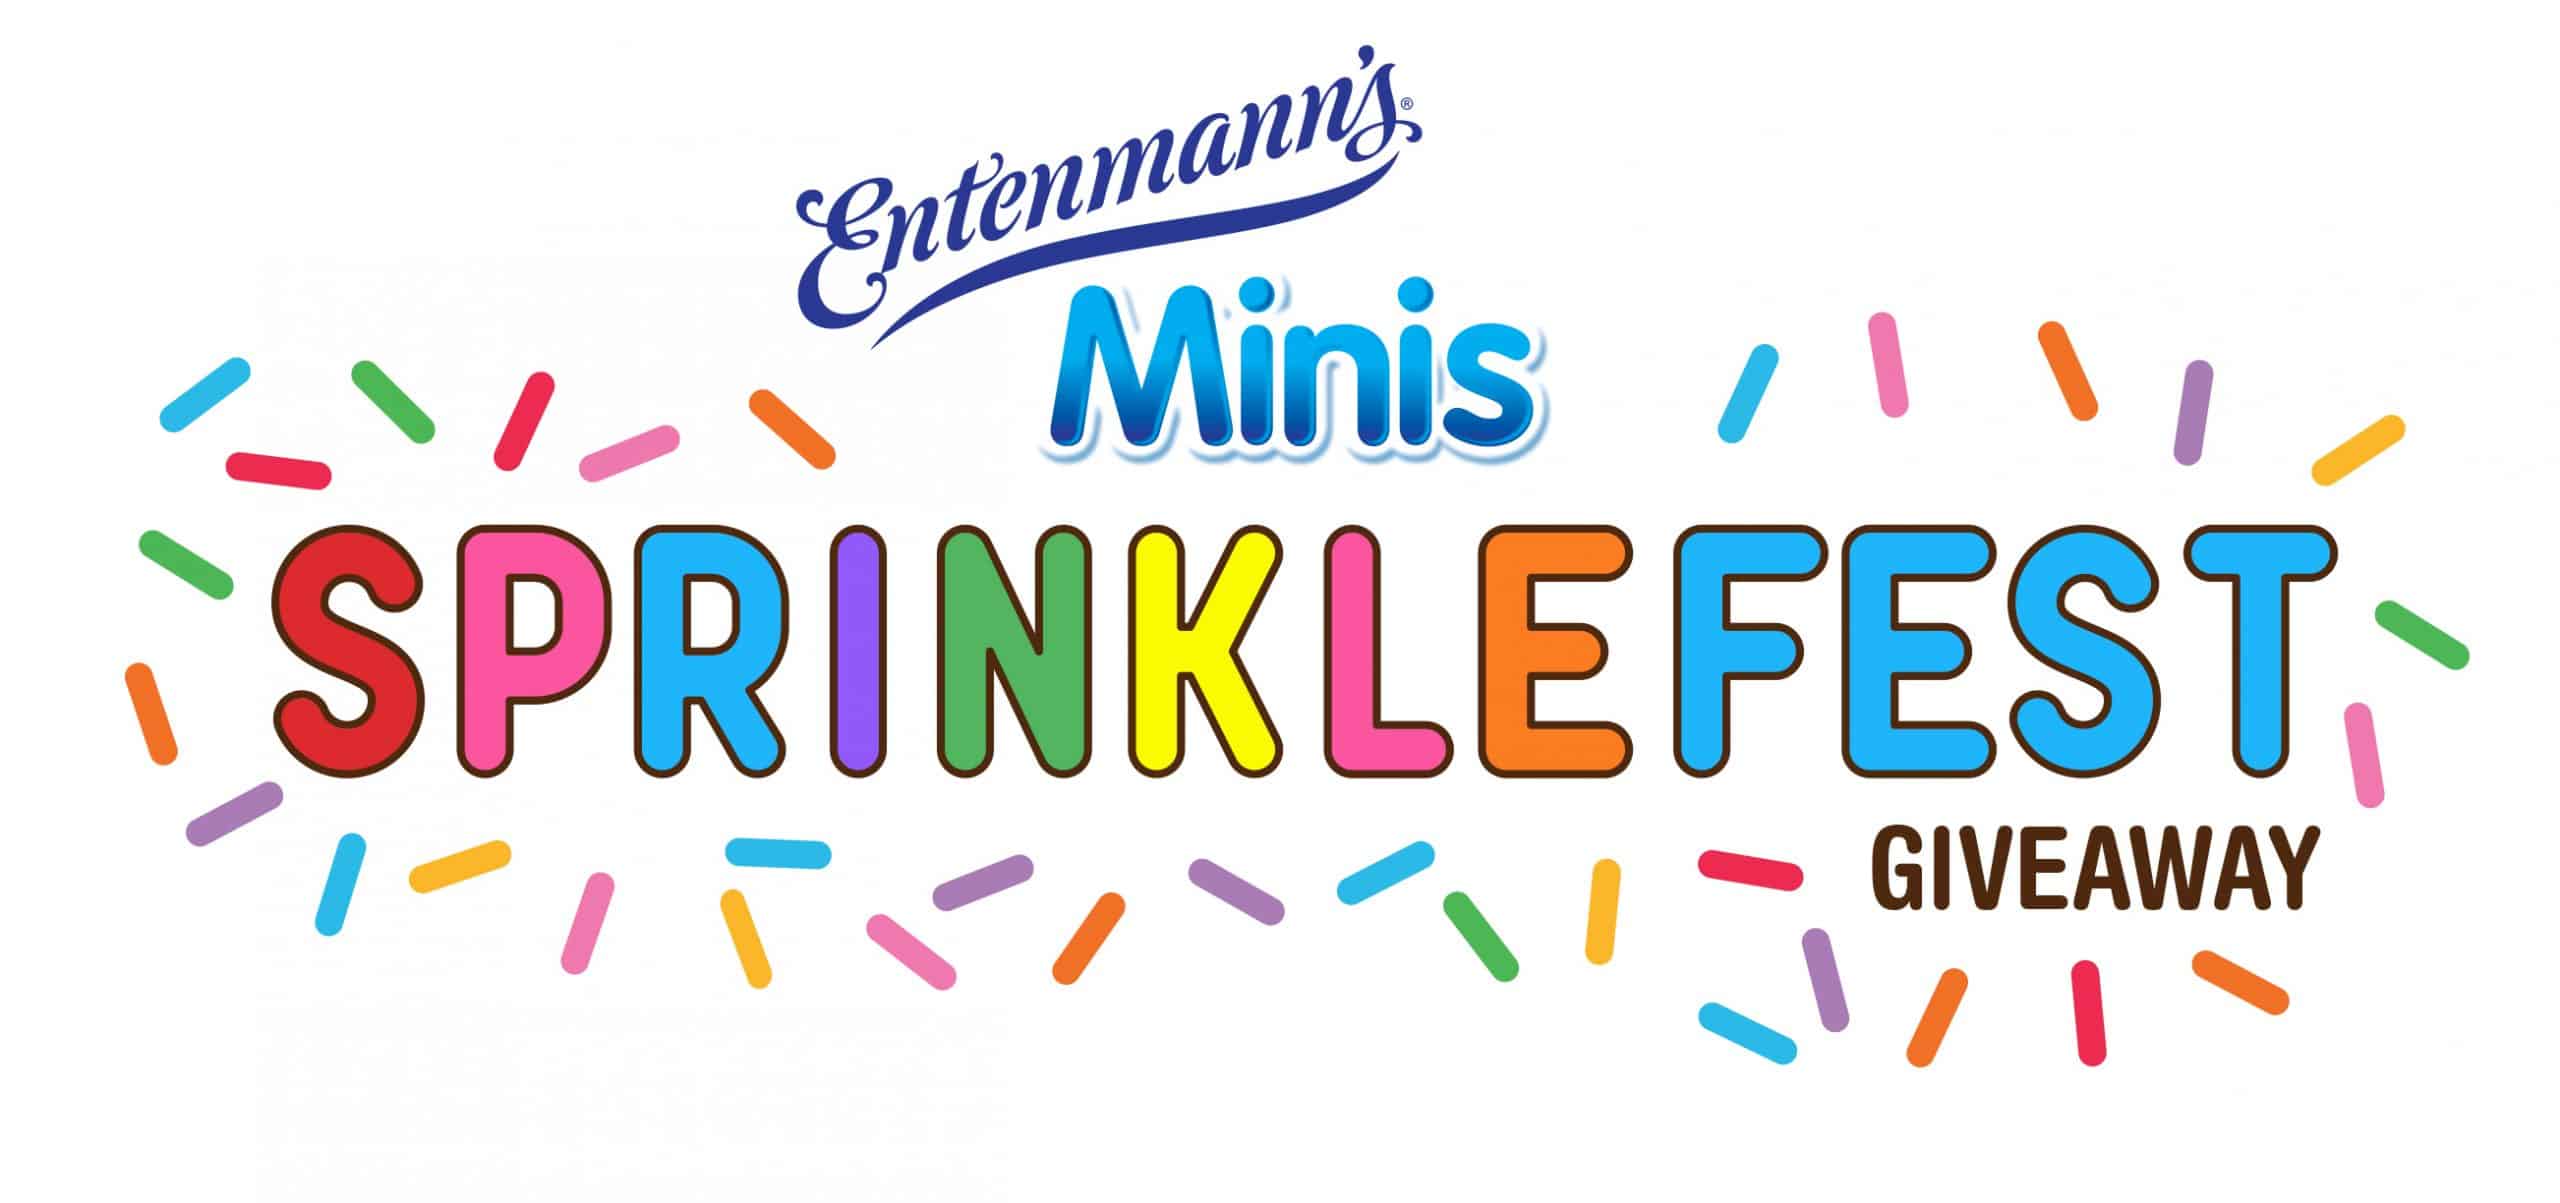 Entenmann's® Minis Sprinkled Iced Brownies Are Pure Joy